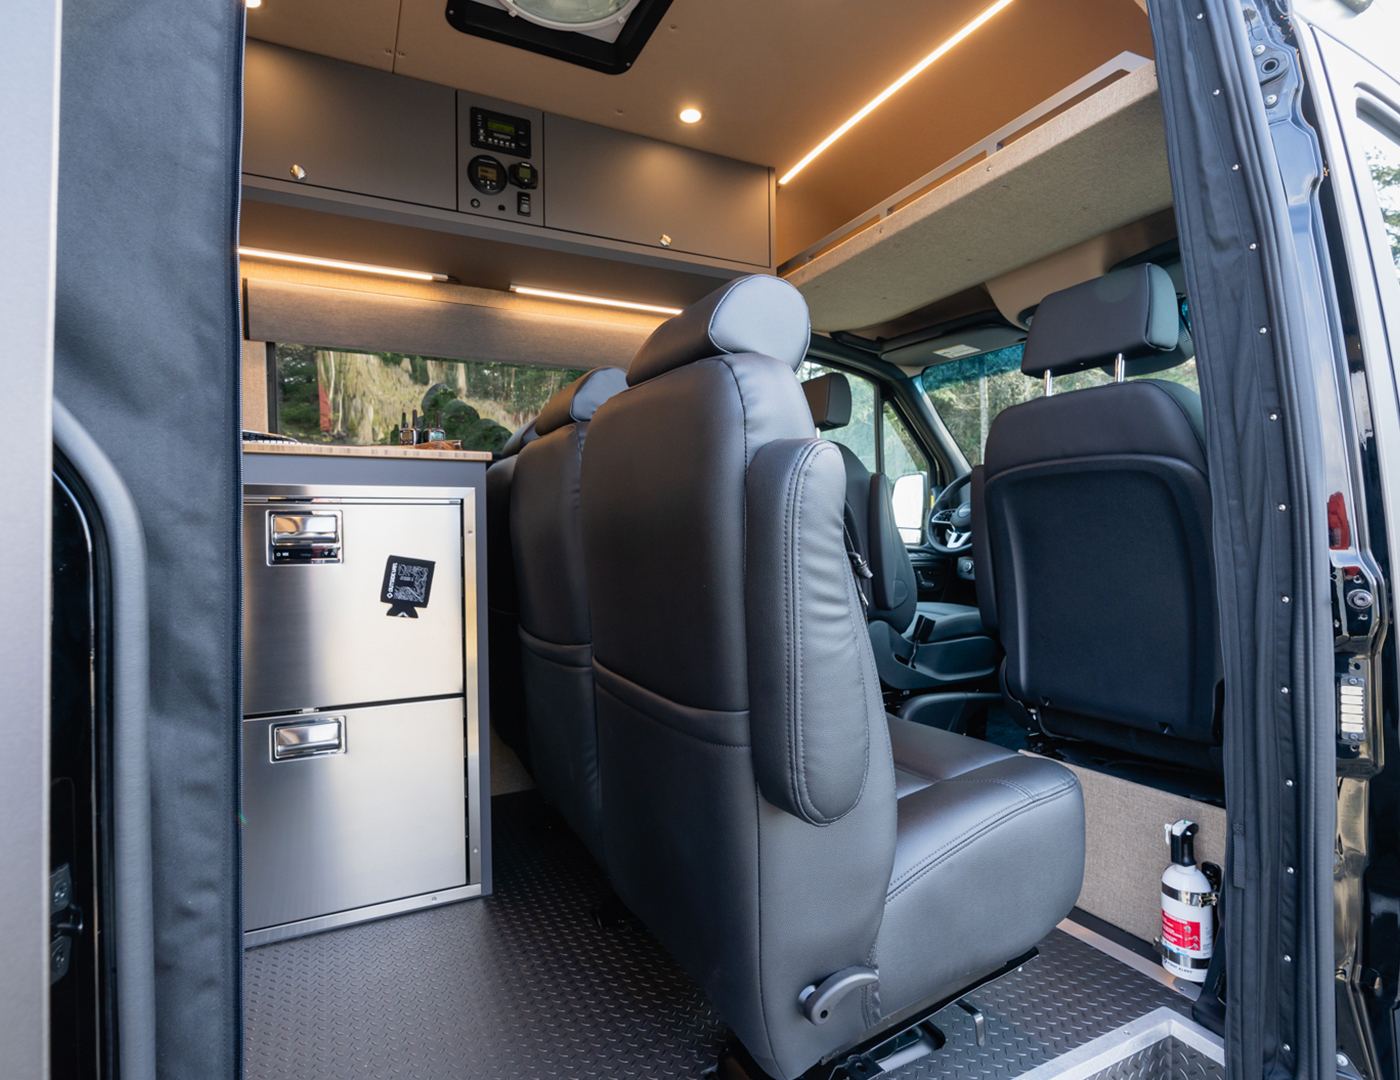 Sprinter 170 EXT open passenger slider door showing trave approved captain's chairs